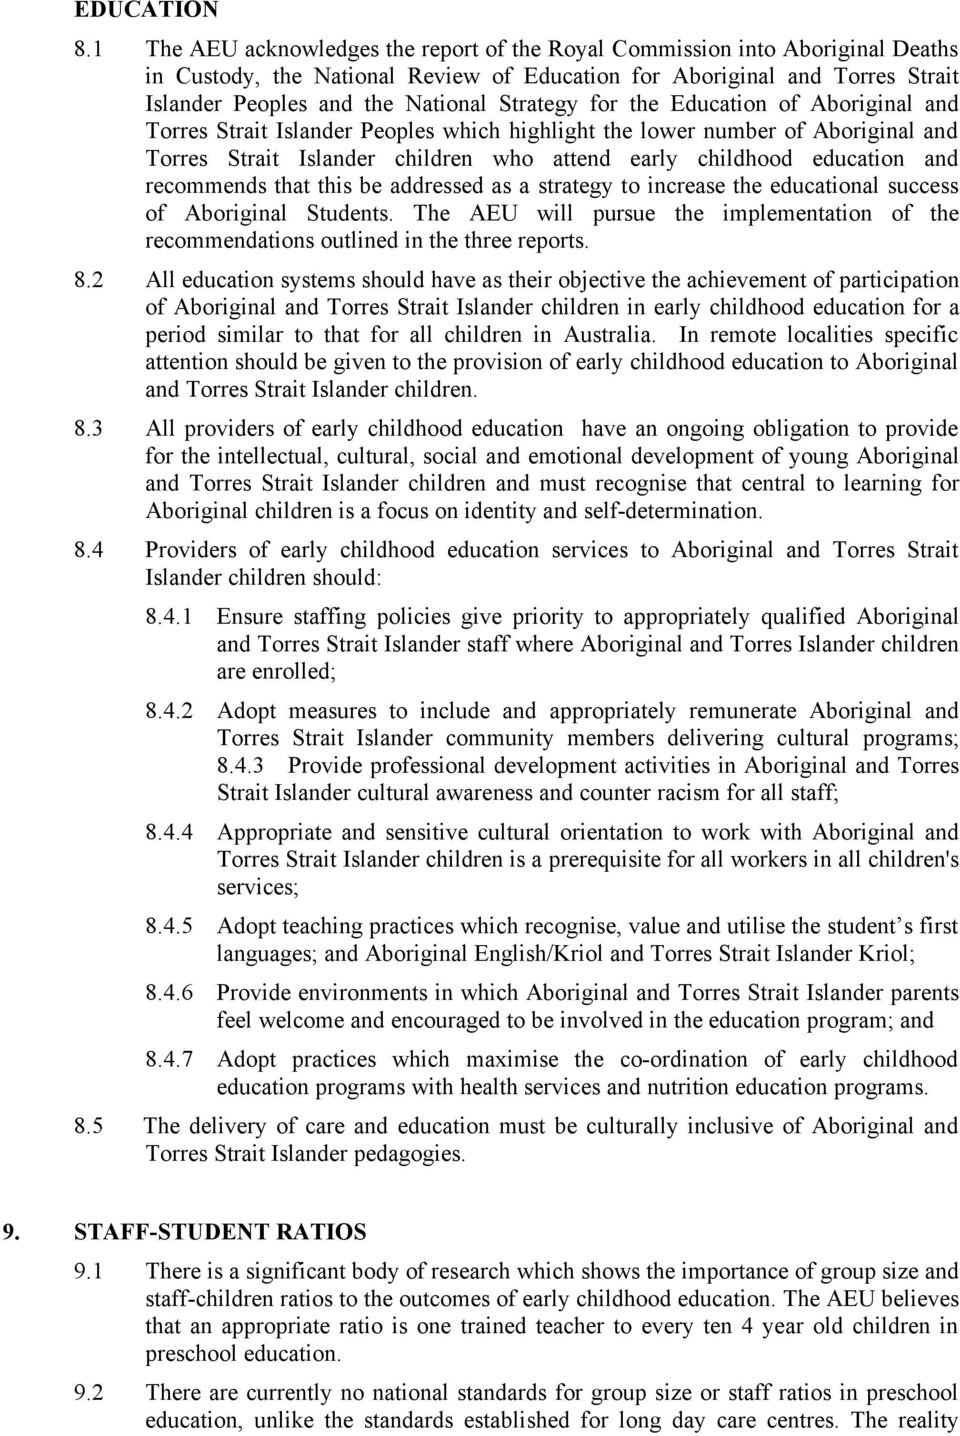 Strategy for the Education of Aboriginal and Torres Strait Islander Peoples which highlight the lower number of Aboriginal and Torres Strait Islander children who attend early childhood education and